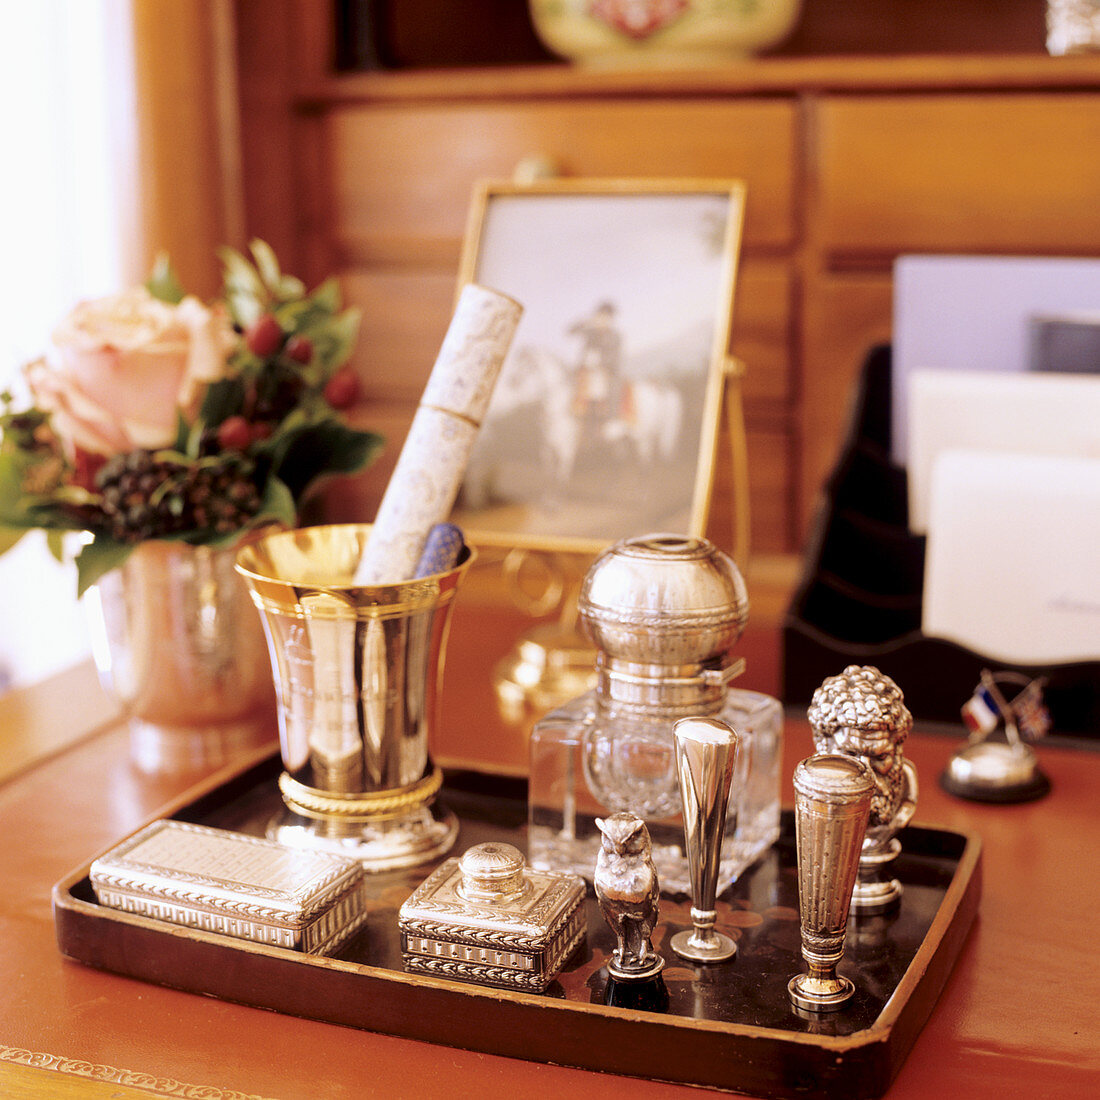 Silver caskets and ornaments on tray on desk